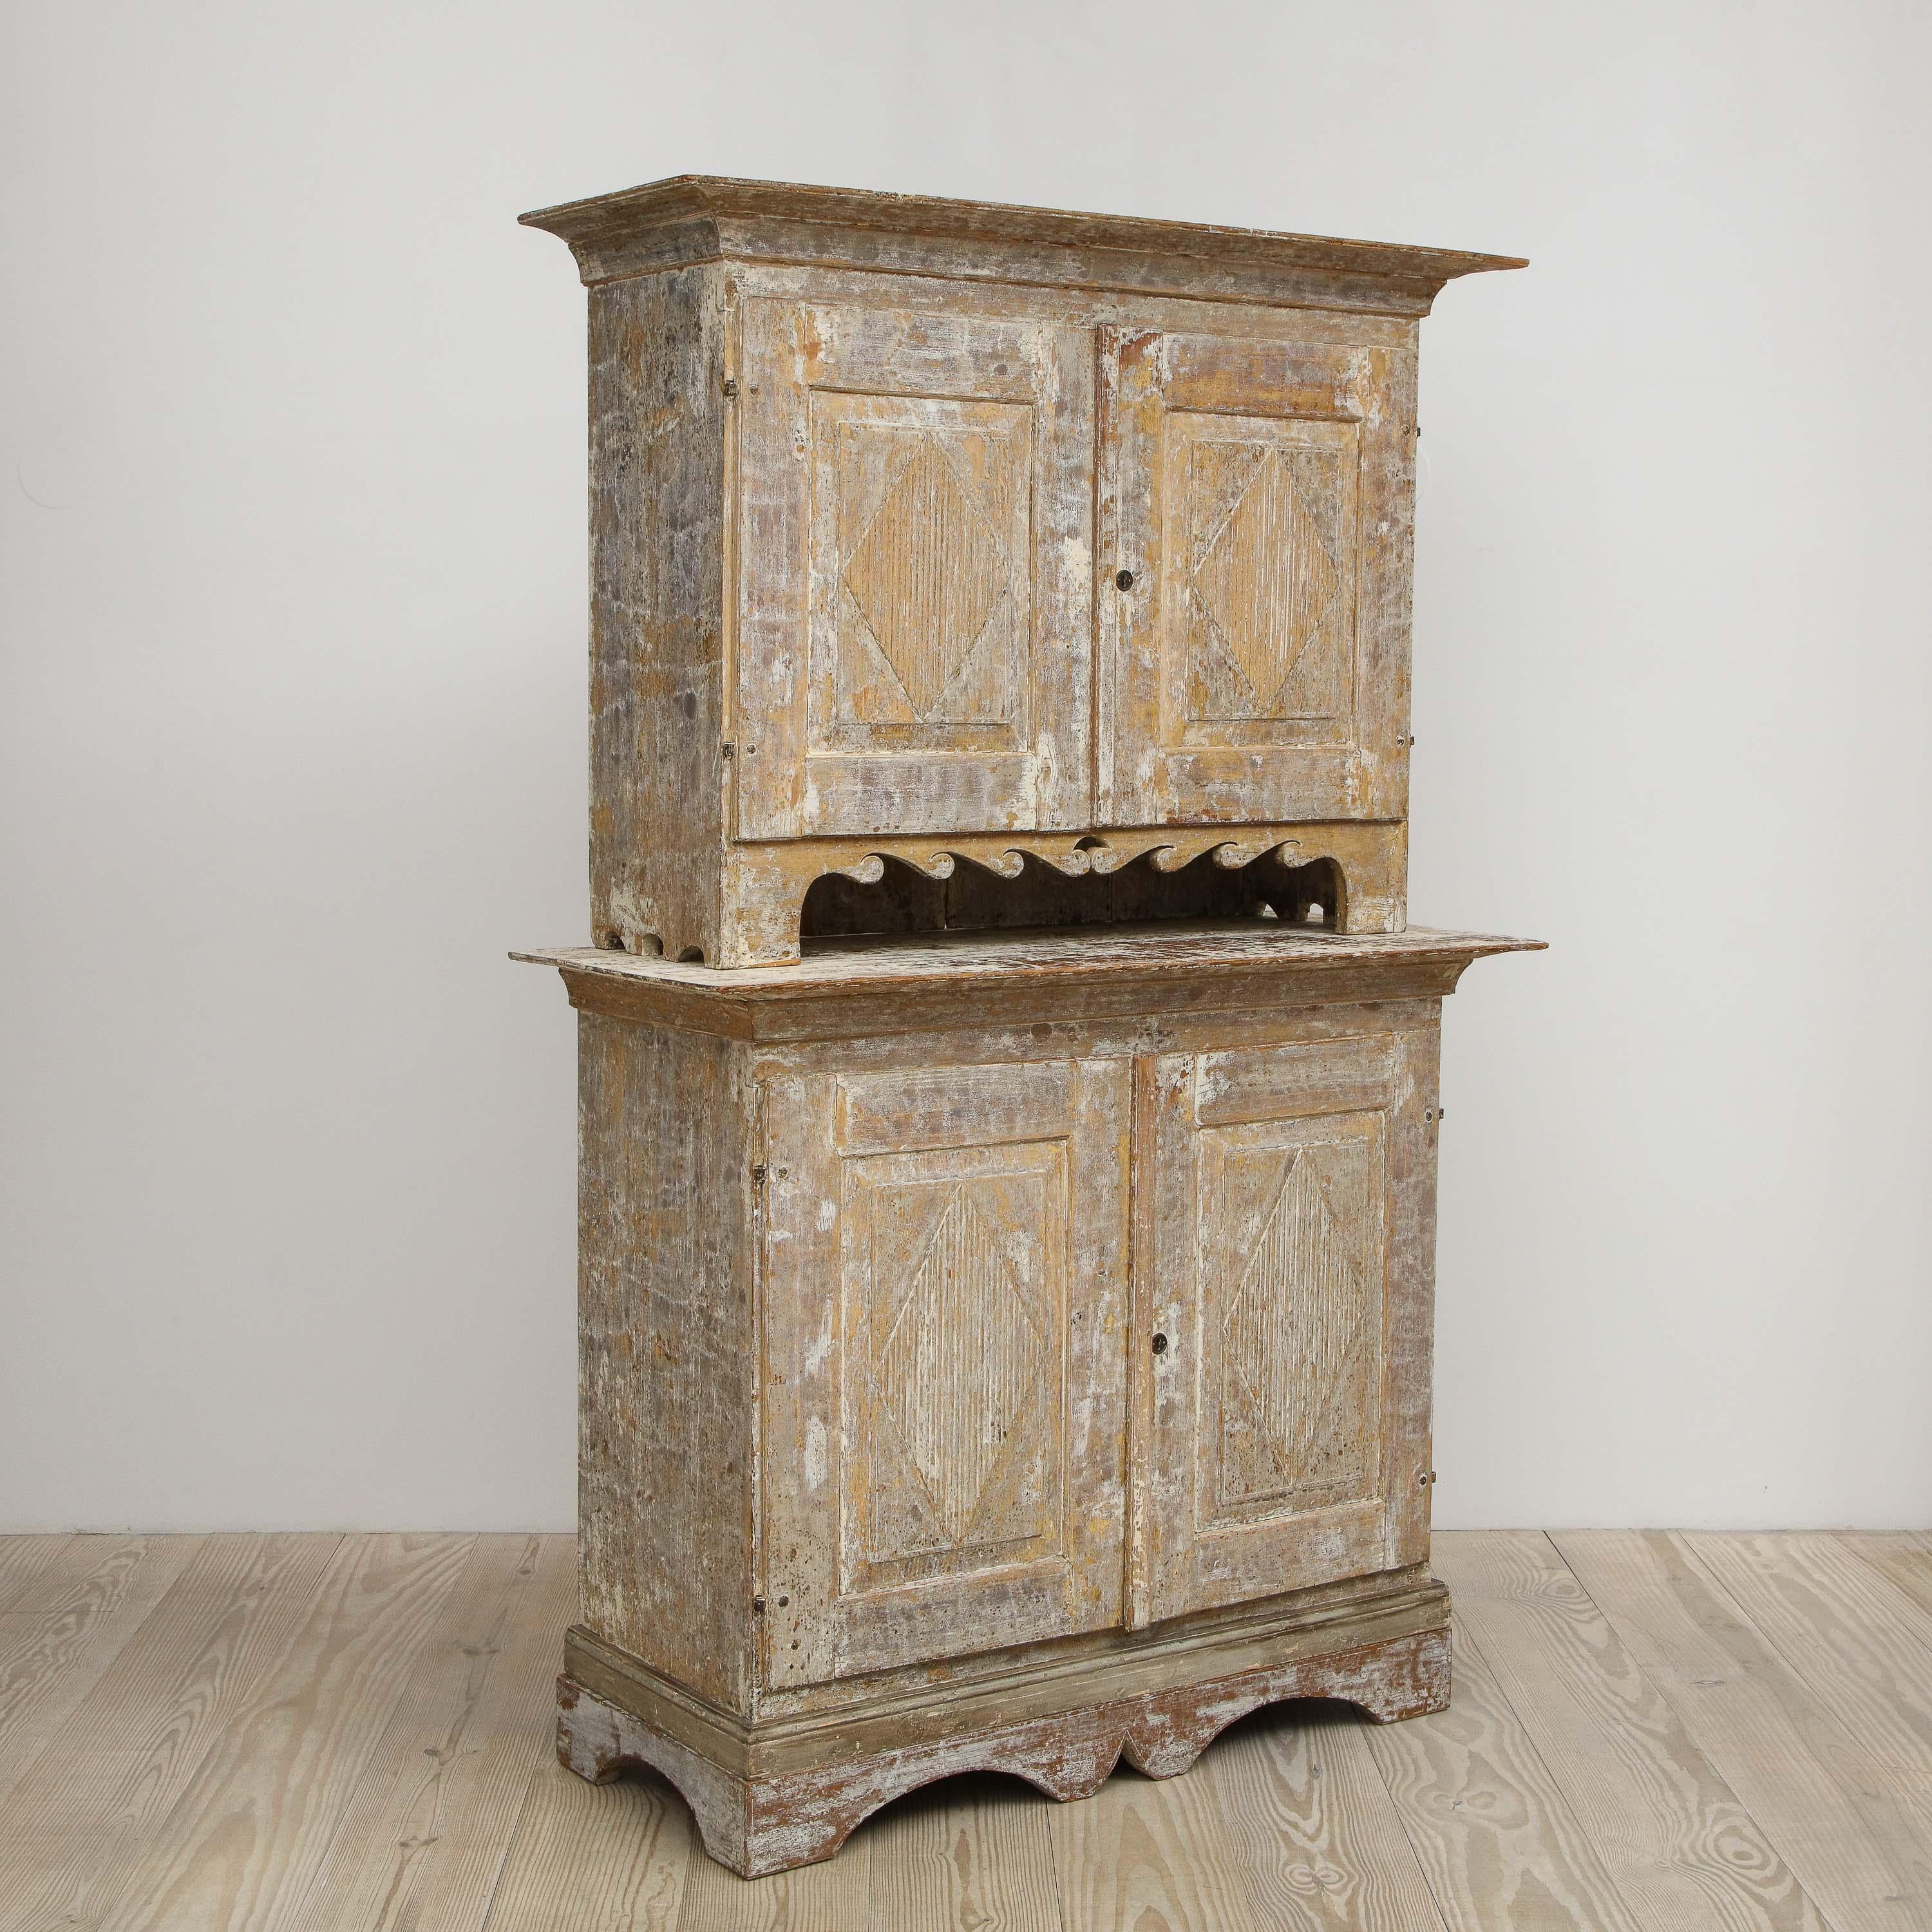 Charming Gustavian cabinet, circa 1790, origin Sweden, upper cabinet with scalloped wave pattern and hand-carved diamond patterns on each door sits atop the lower cabinet. 

The beautifully layered, hand-painted original color and elegant surface